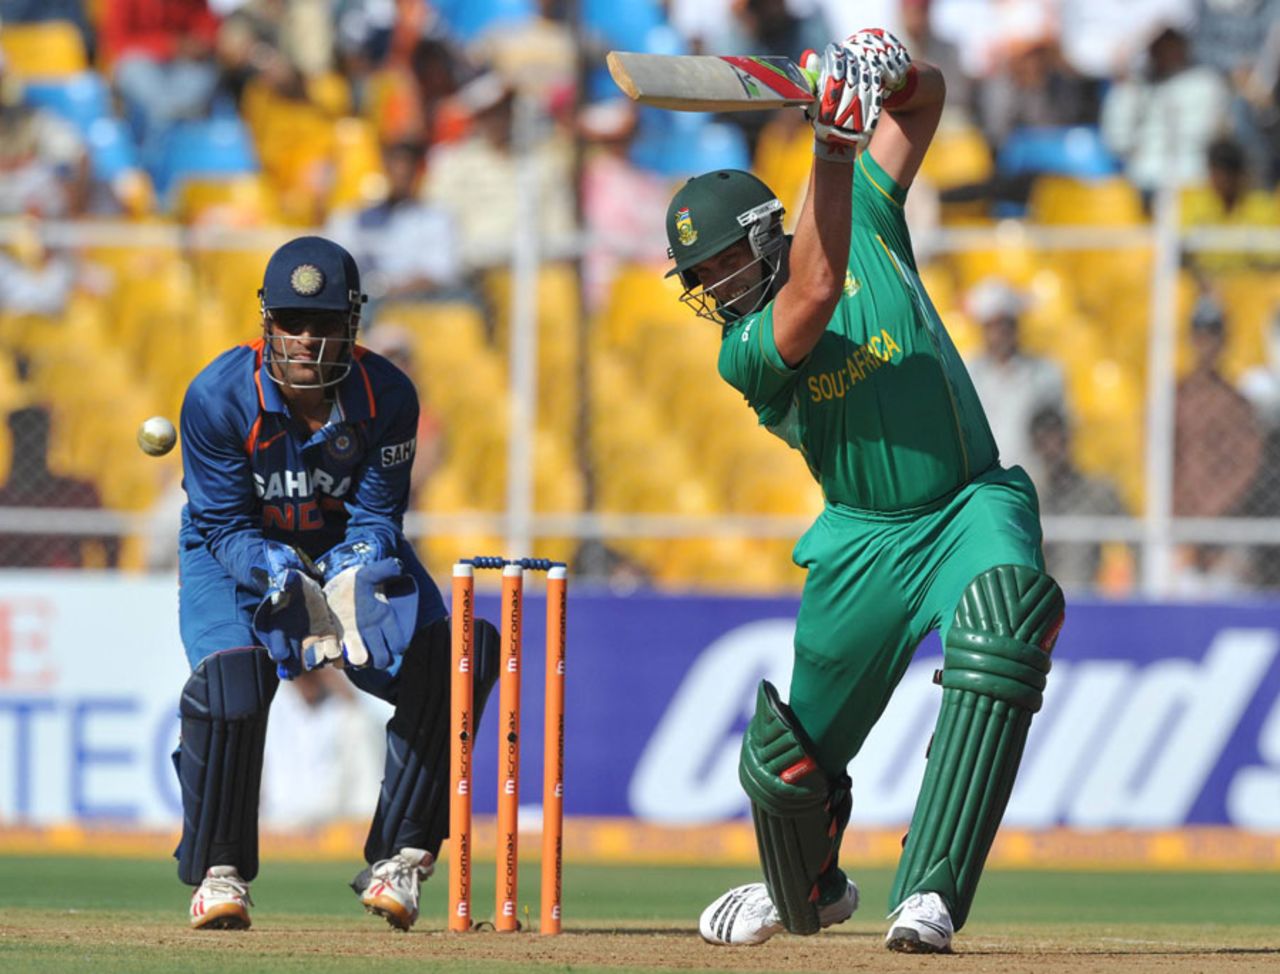 Jacques Kallis muscles it through the off side, India v South Africa, 3rd ODI, Ahmedabad, February 27, 2010